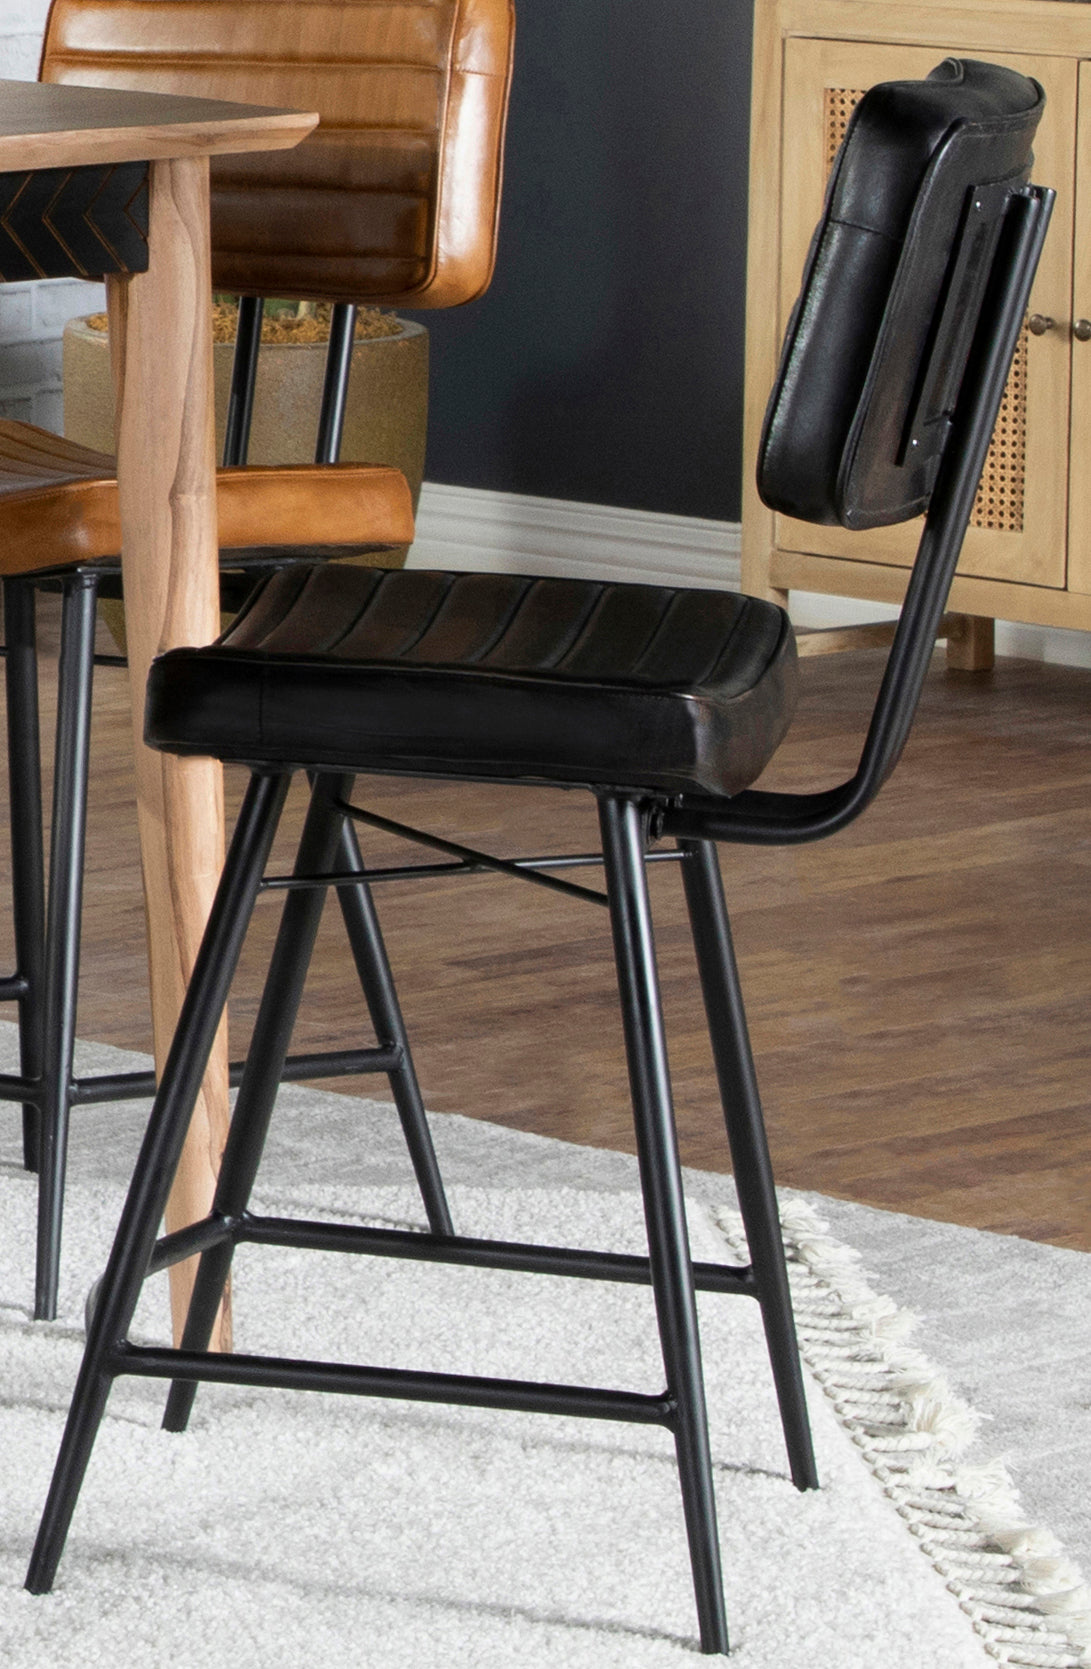 Partridge Upholstered Counter Height Stools with Footrest (Set of 2)  Las Vegas Furniture Stores